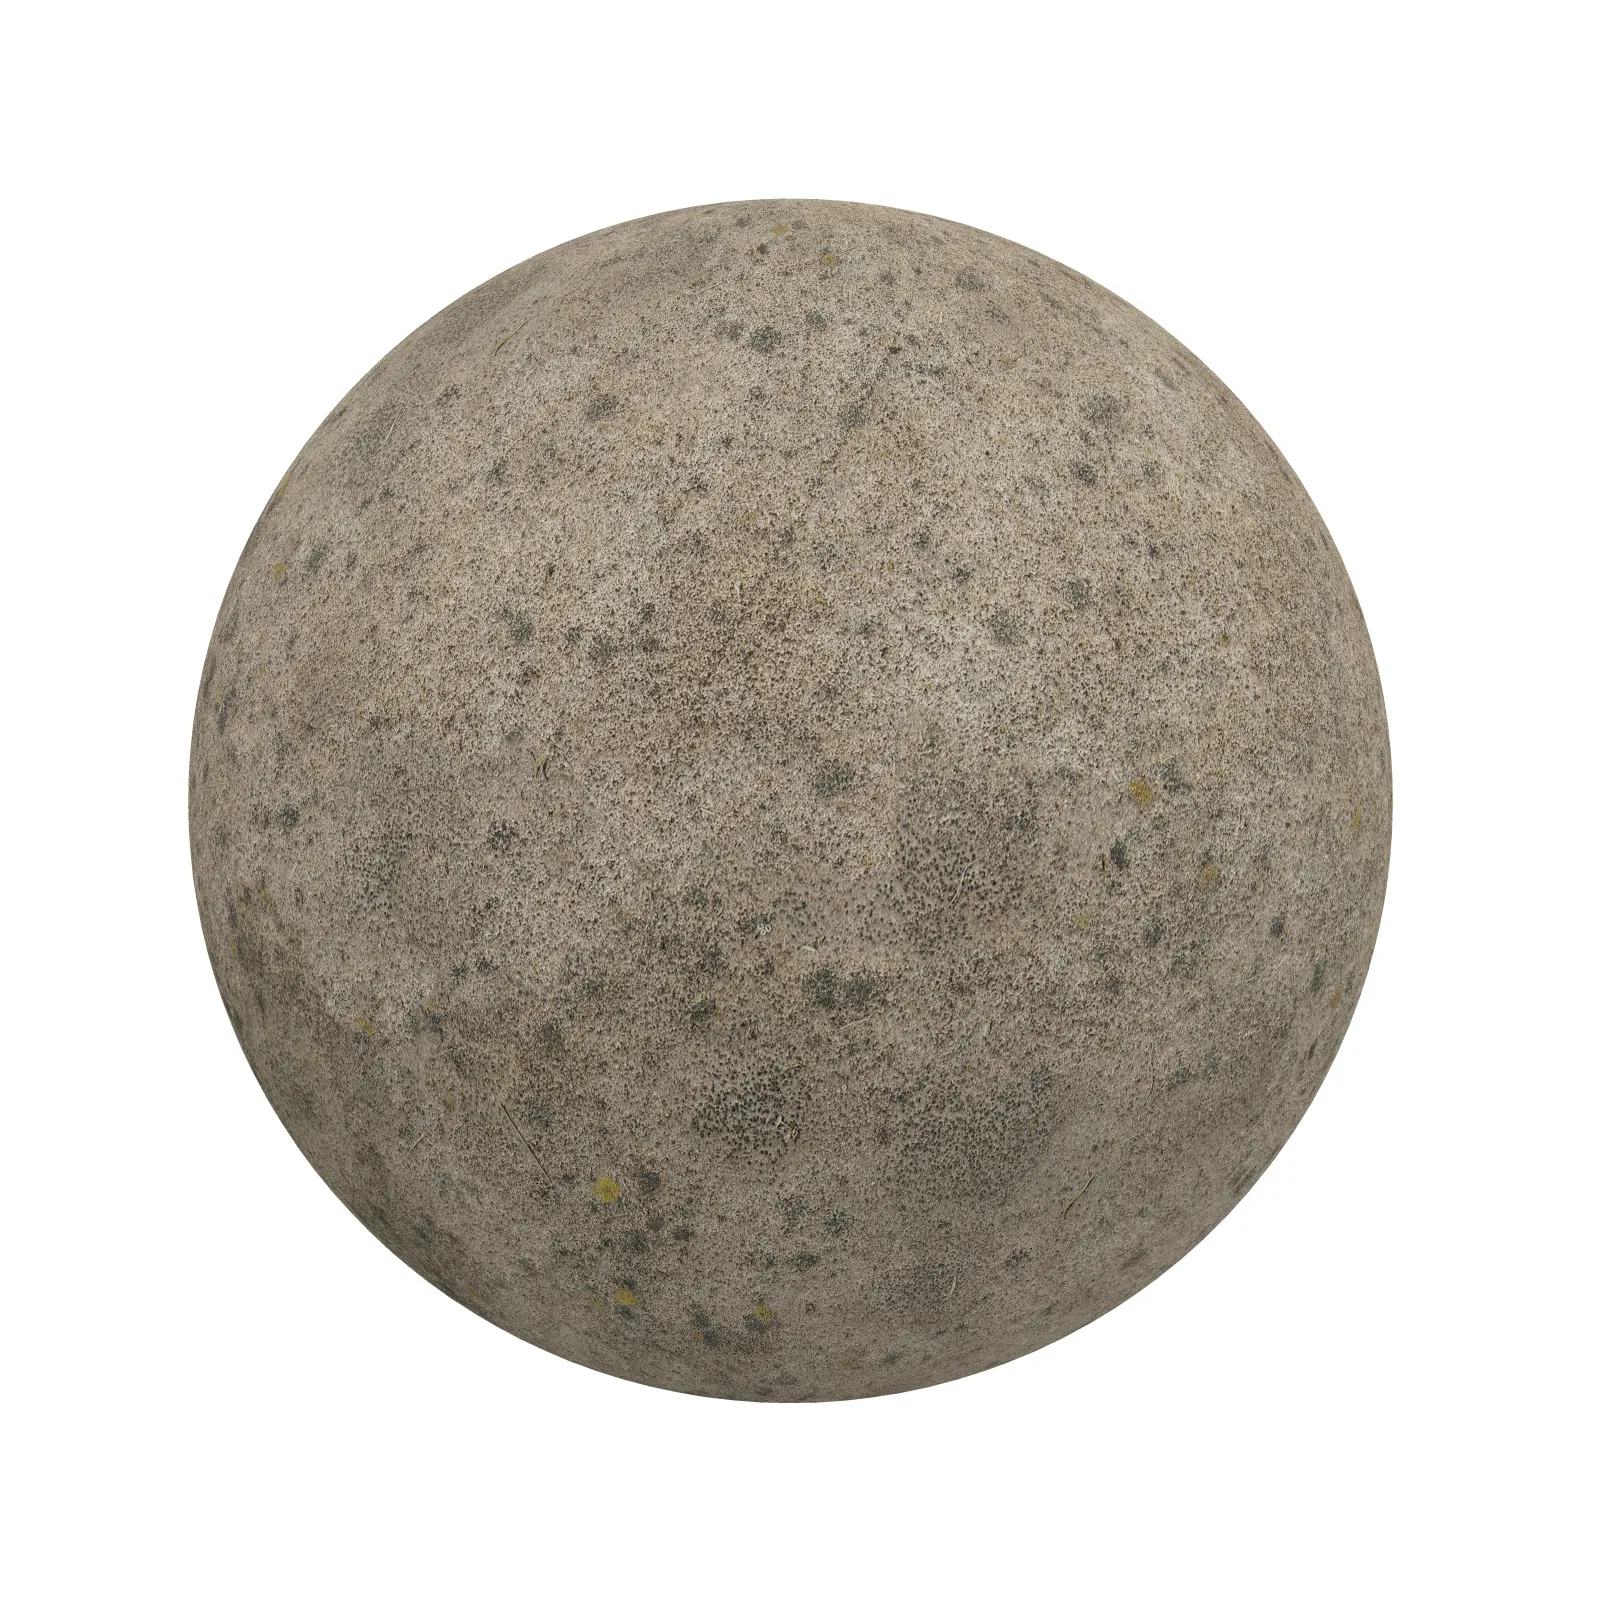 TEXTURES – STONES – CGAxis PBR Colection Vol 1 Stones – brown stone